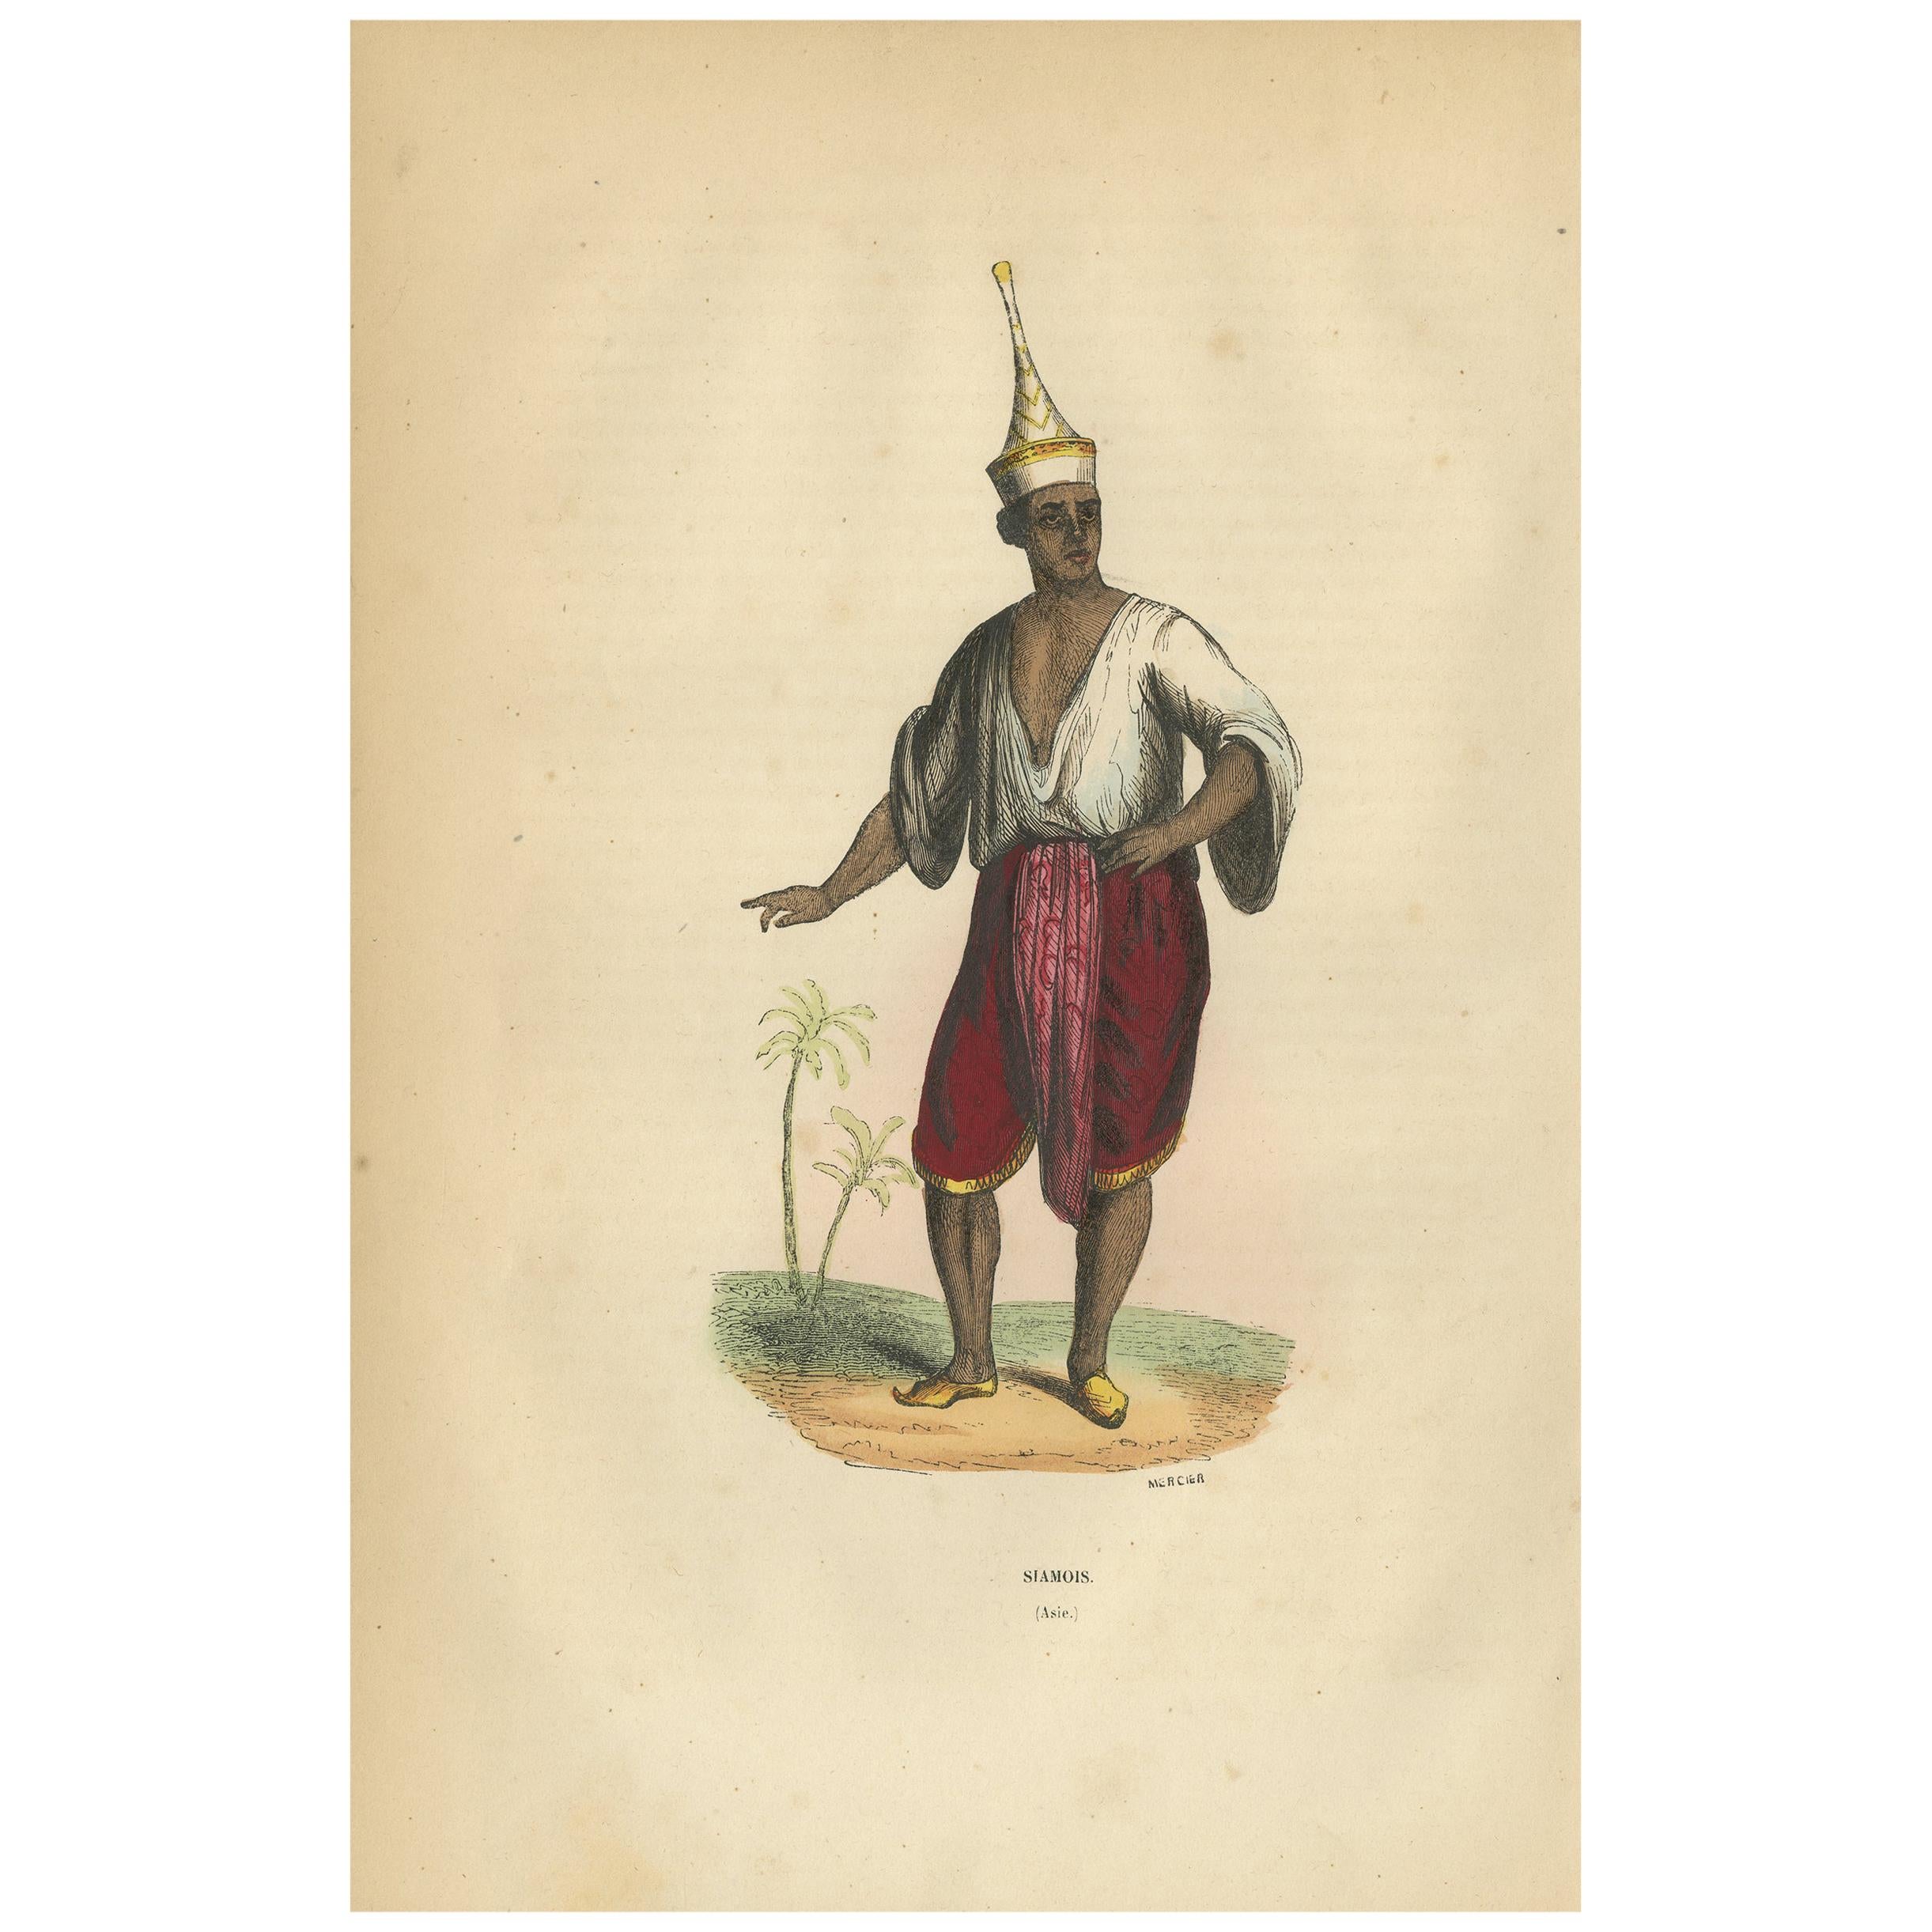 Antique Print of a Siamese Man by Wahlen '1843'